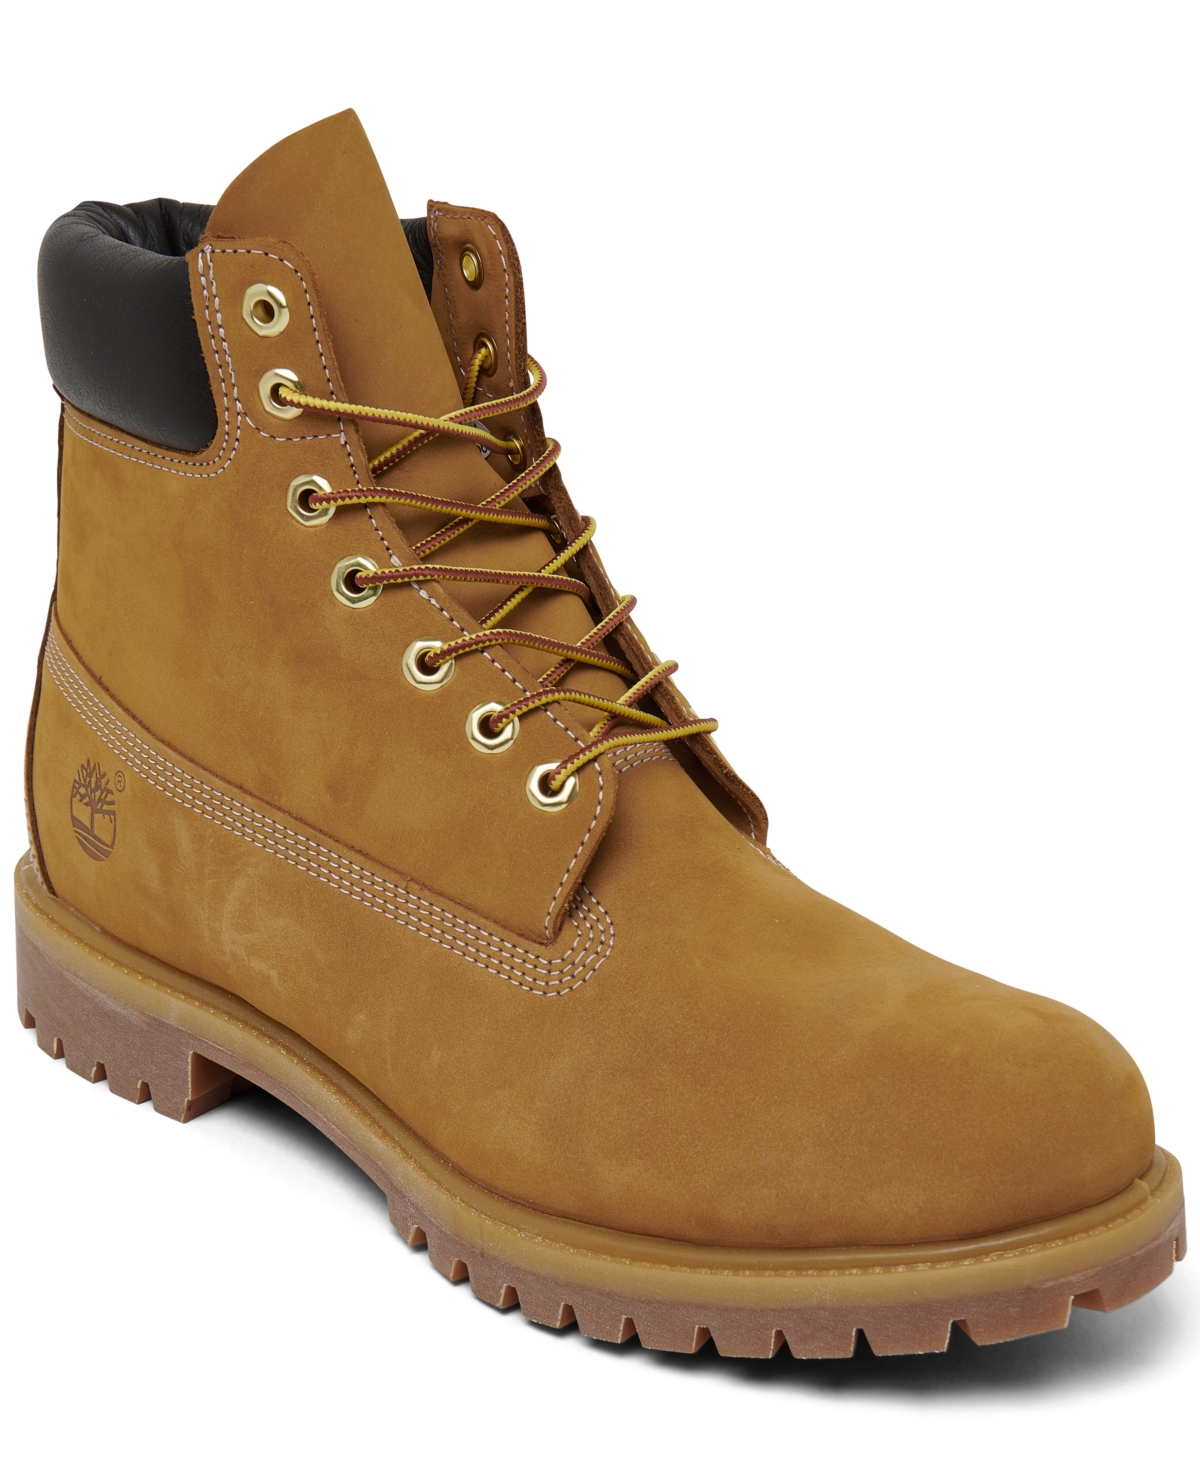 Men's 6 Inch Premium Waterproof Boots from Finish Line - Wheat